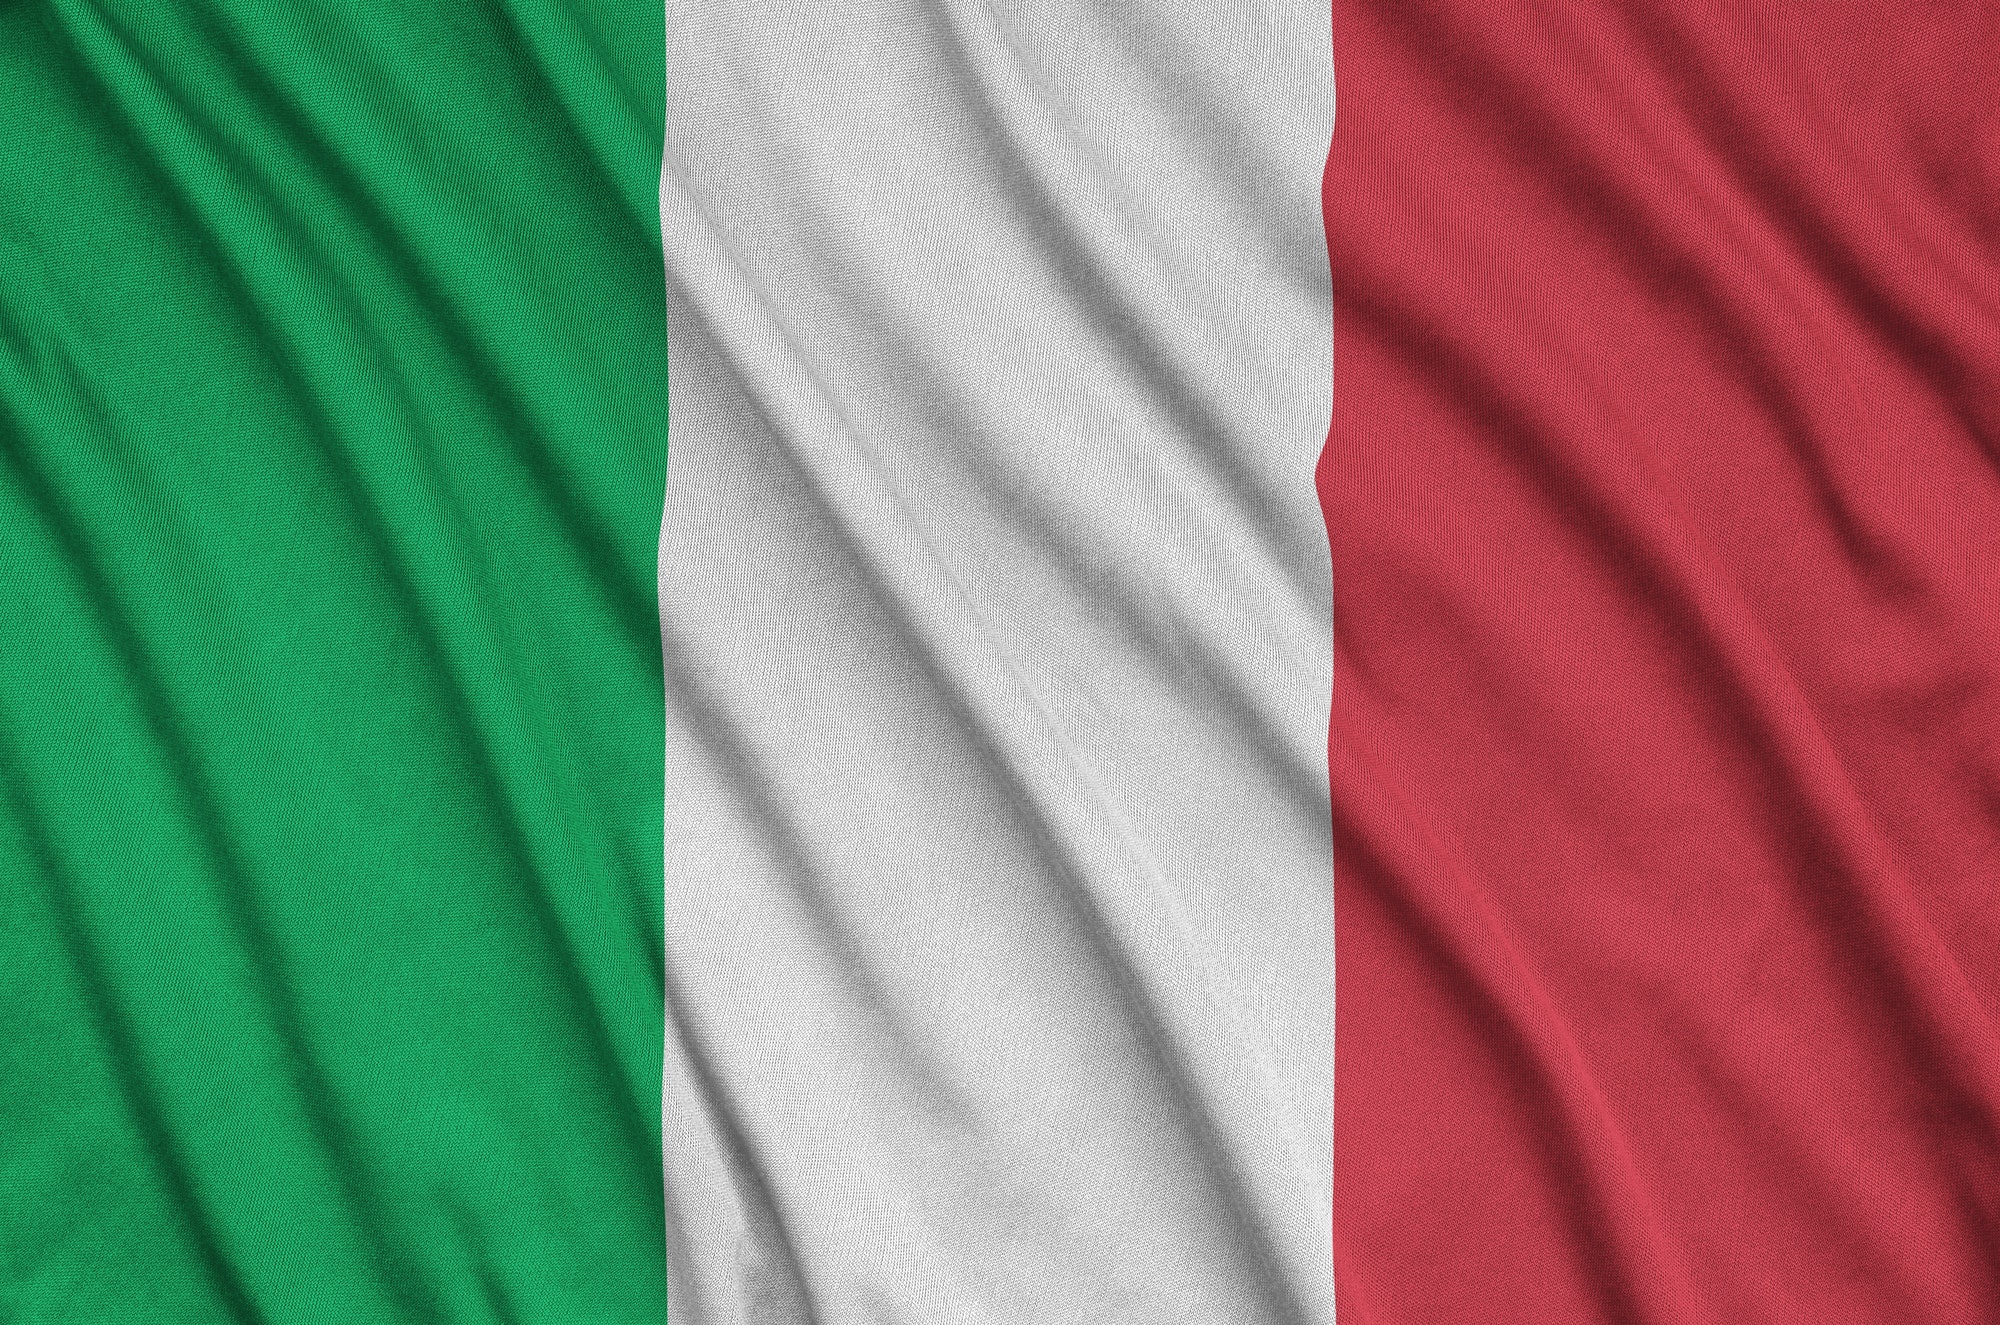 Italy flag is depicted on a sports cloth fabric with many folds. Sport team waving banner